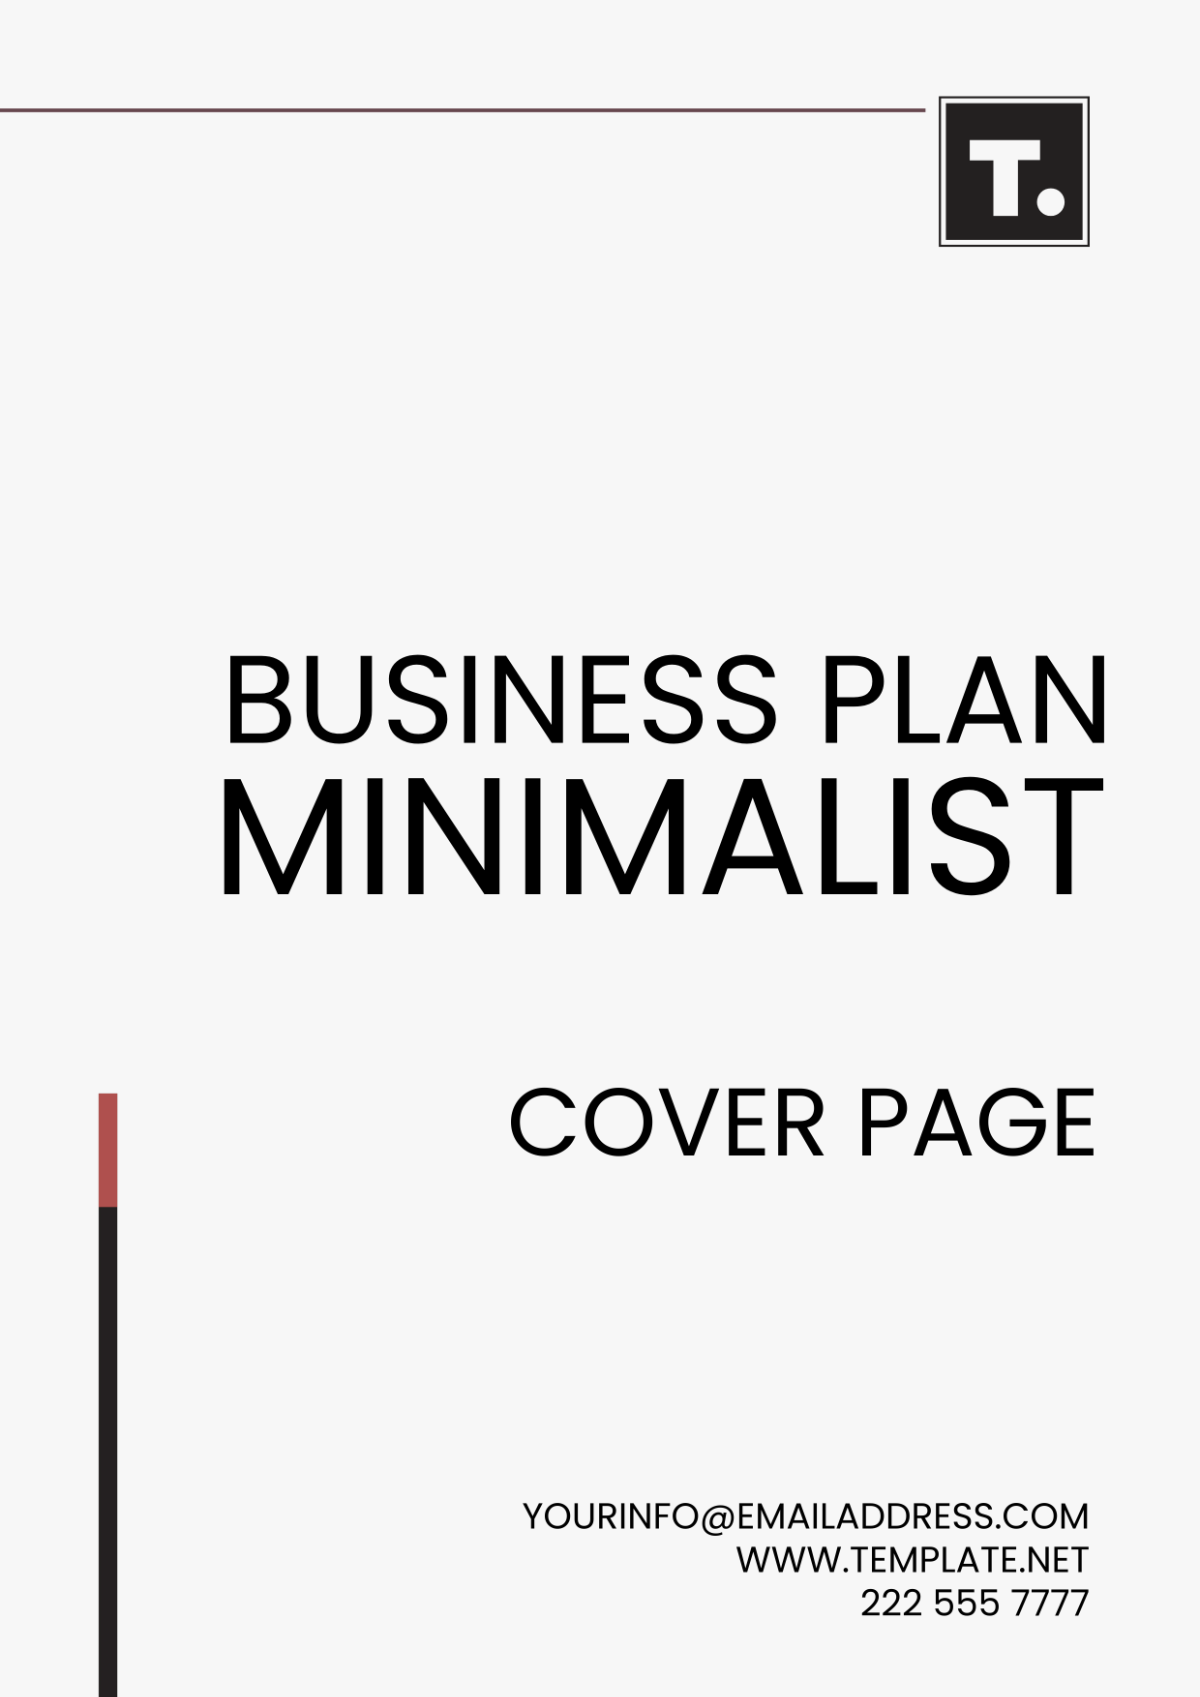 Free Business Plan Minimalist Cover Page Template